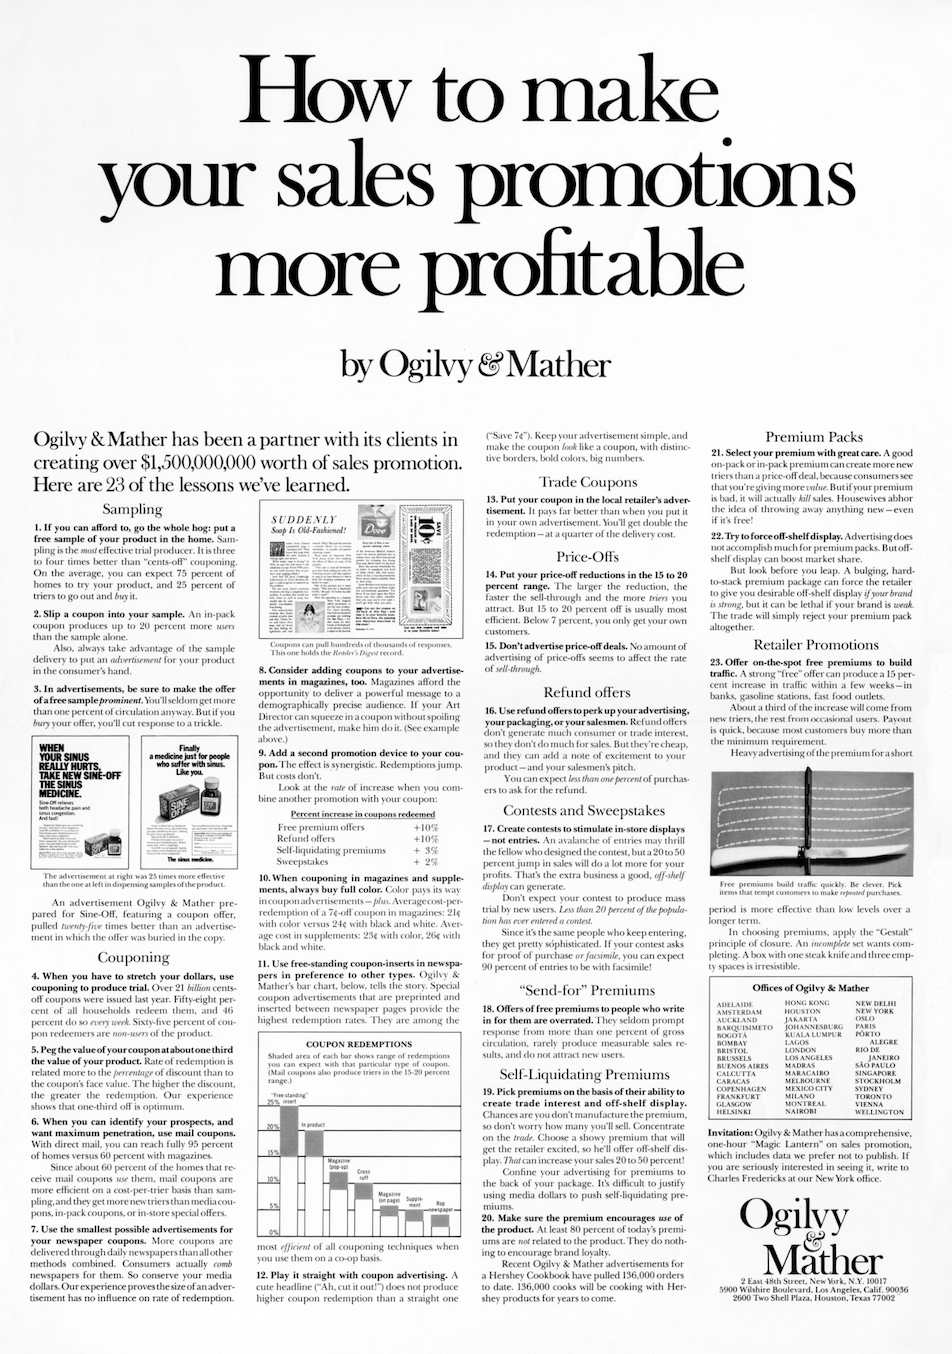 How to Make Your Ads more Profitable by Ogilvy